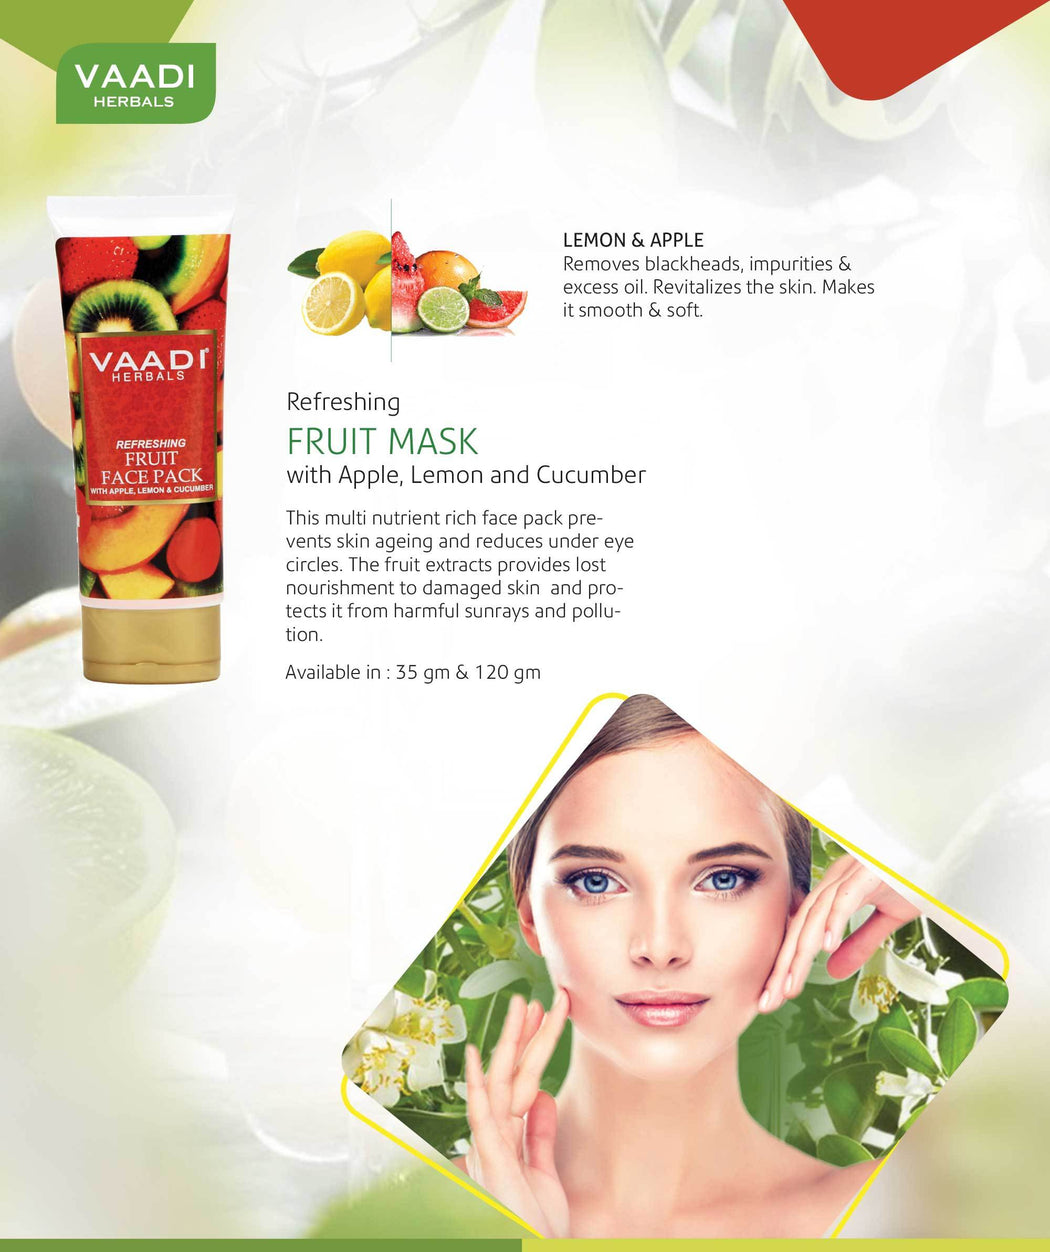 Refreshing Organic Fruit Face Pack with Apple, Lemon & Cucumber - Protects & Revitalizes Skin  (2 x 120 gms/ 4.3 oz)